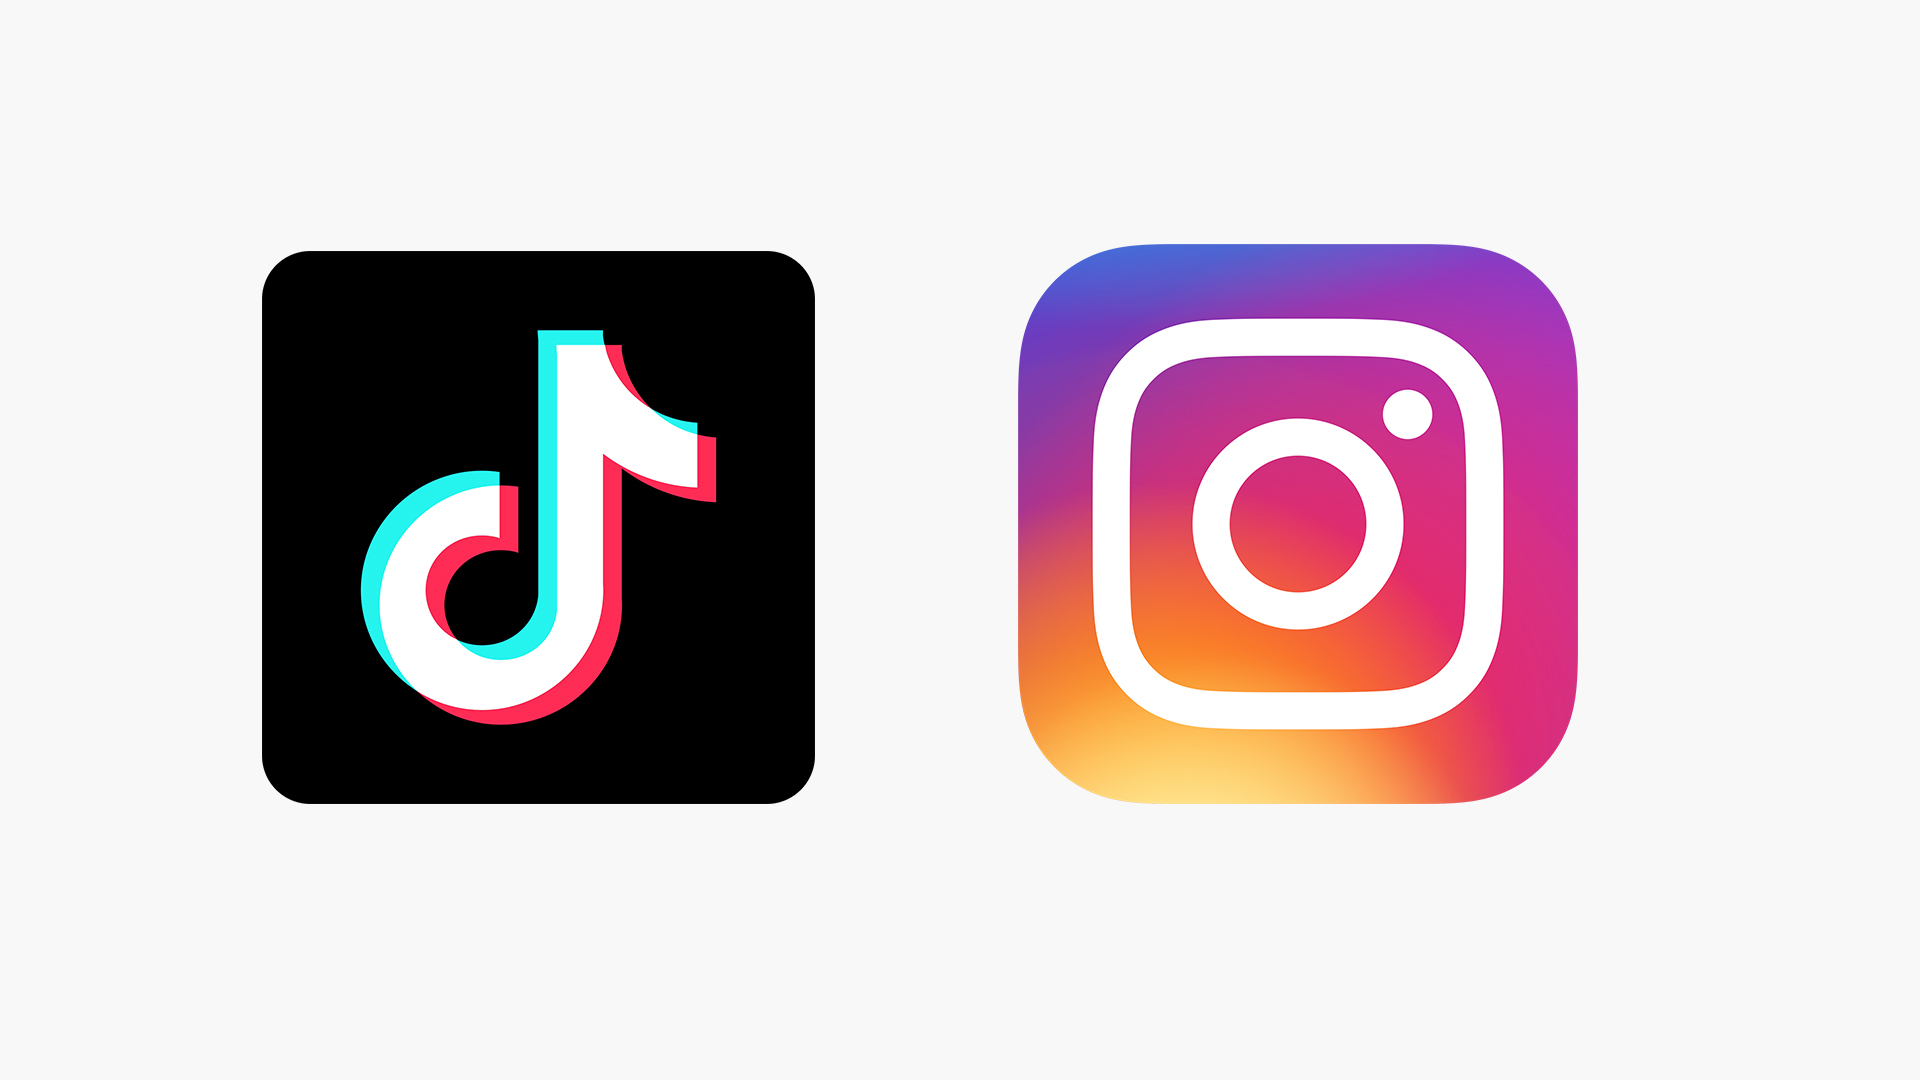 Could TikTok maybe not launch a new photo app? Please?